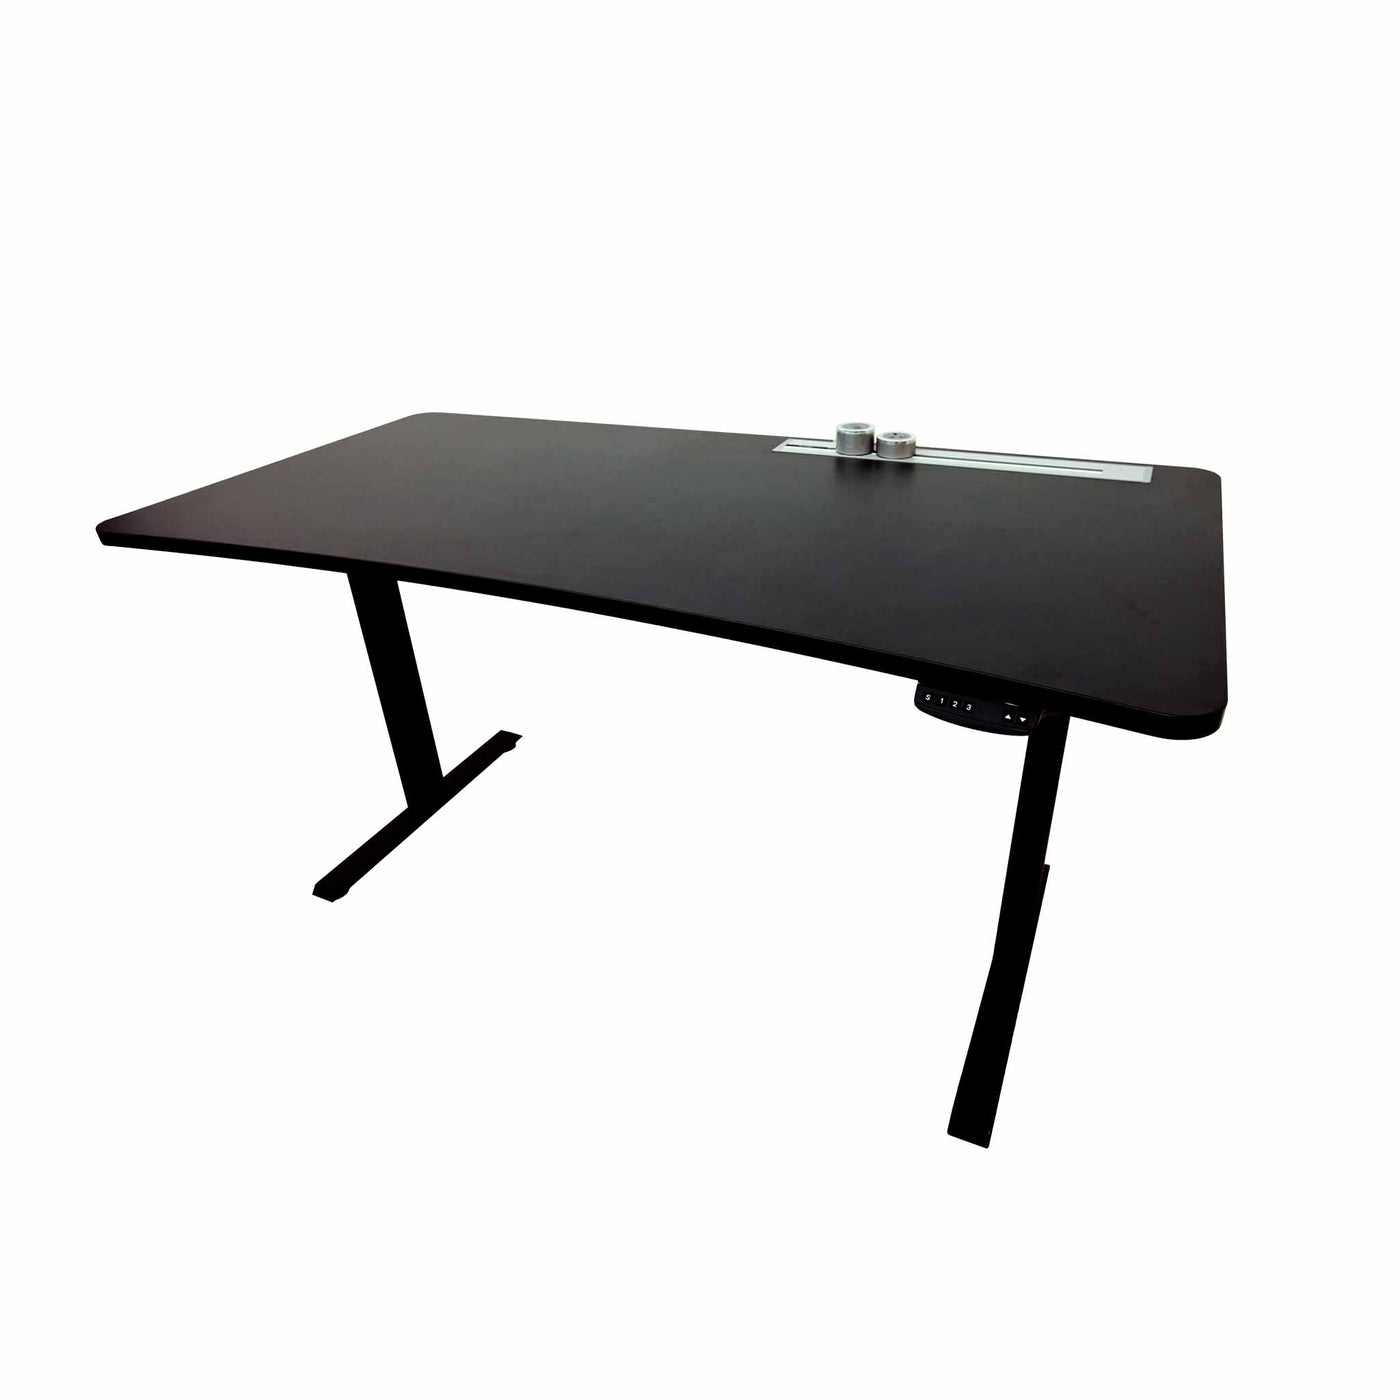 TYYLI You Raise Me Up Series Ergonomic Electric Standing Adjustable Desk Table